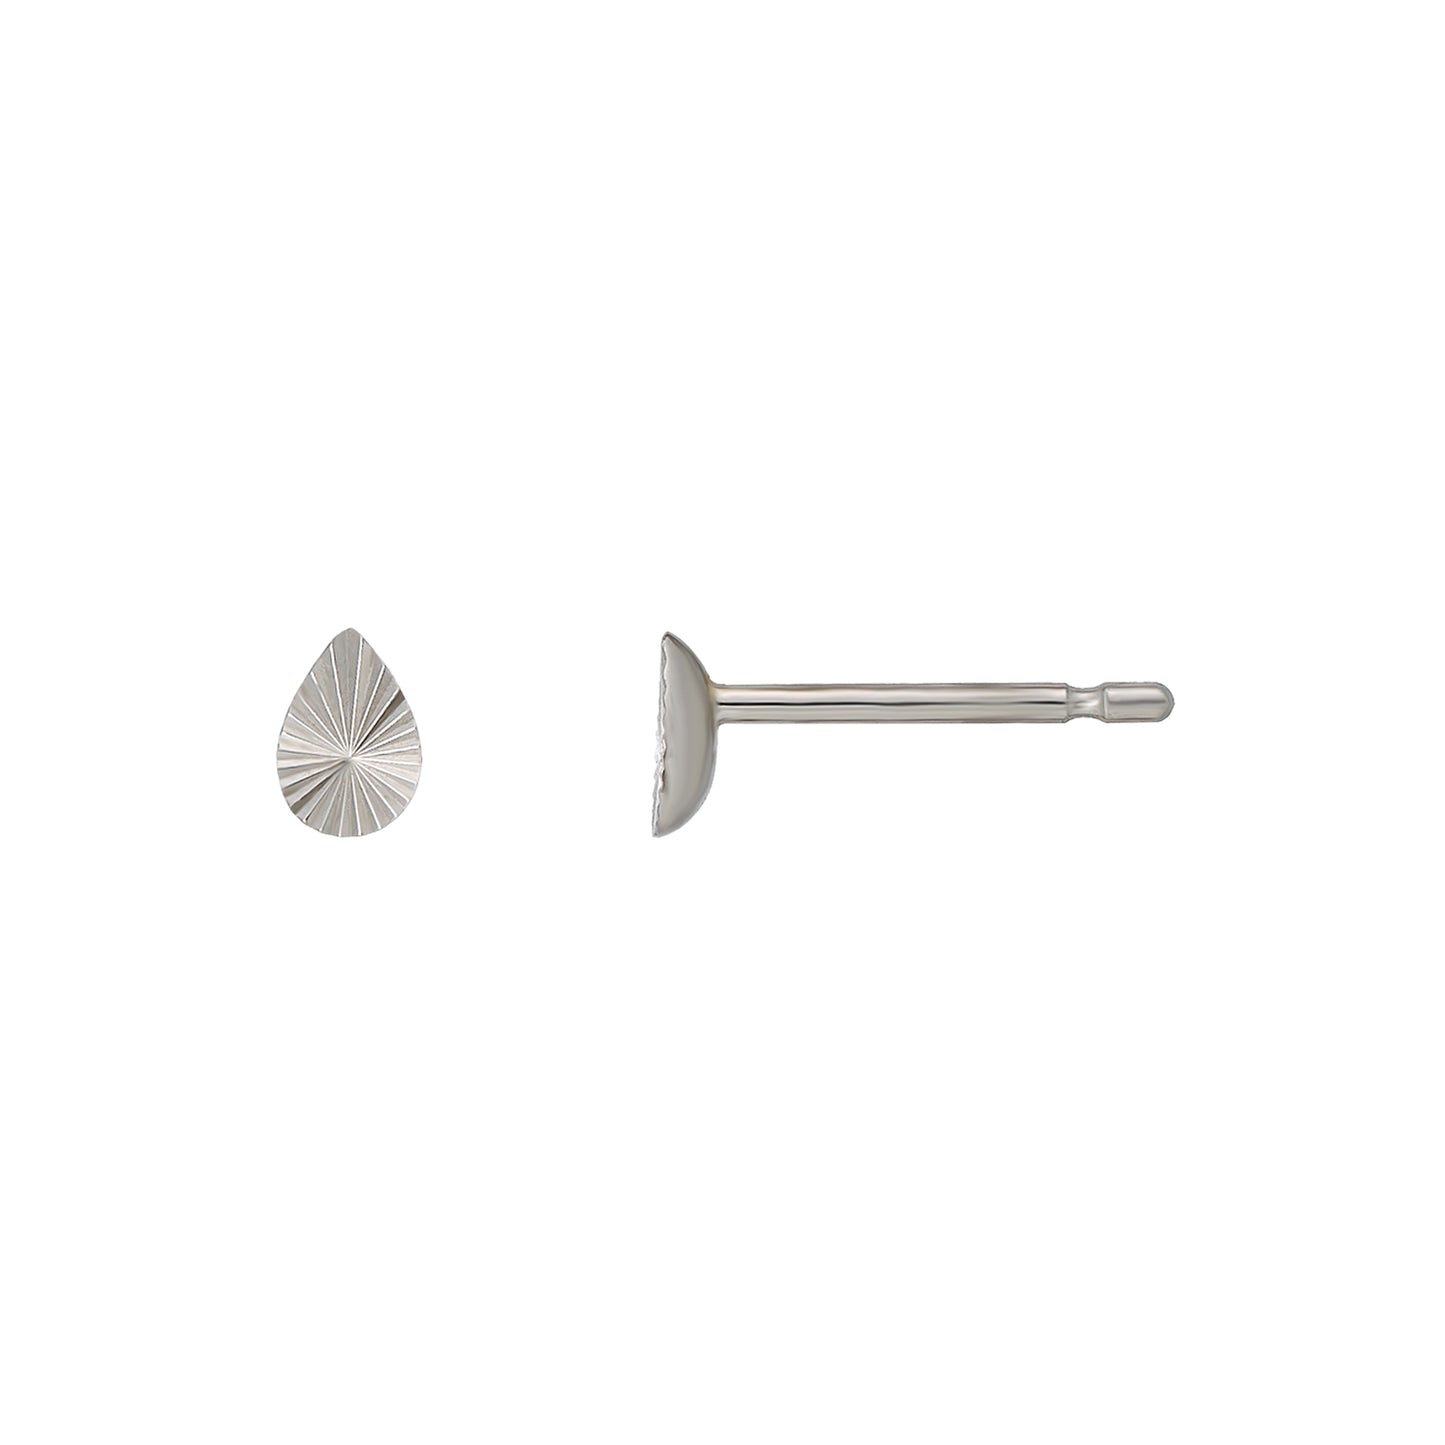 [Second Earrings] Platinum Drop Earrings With Radiating Lines - Product Image